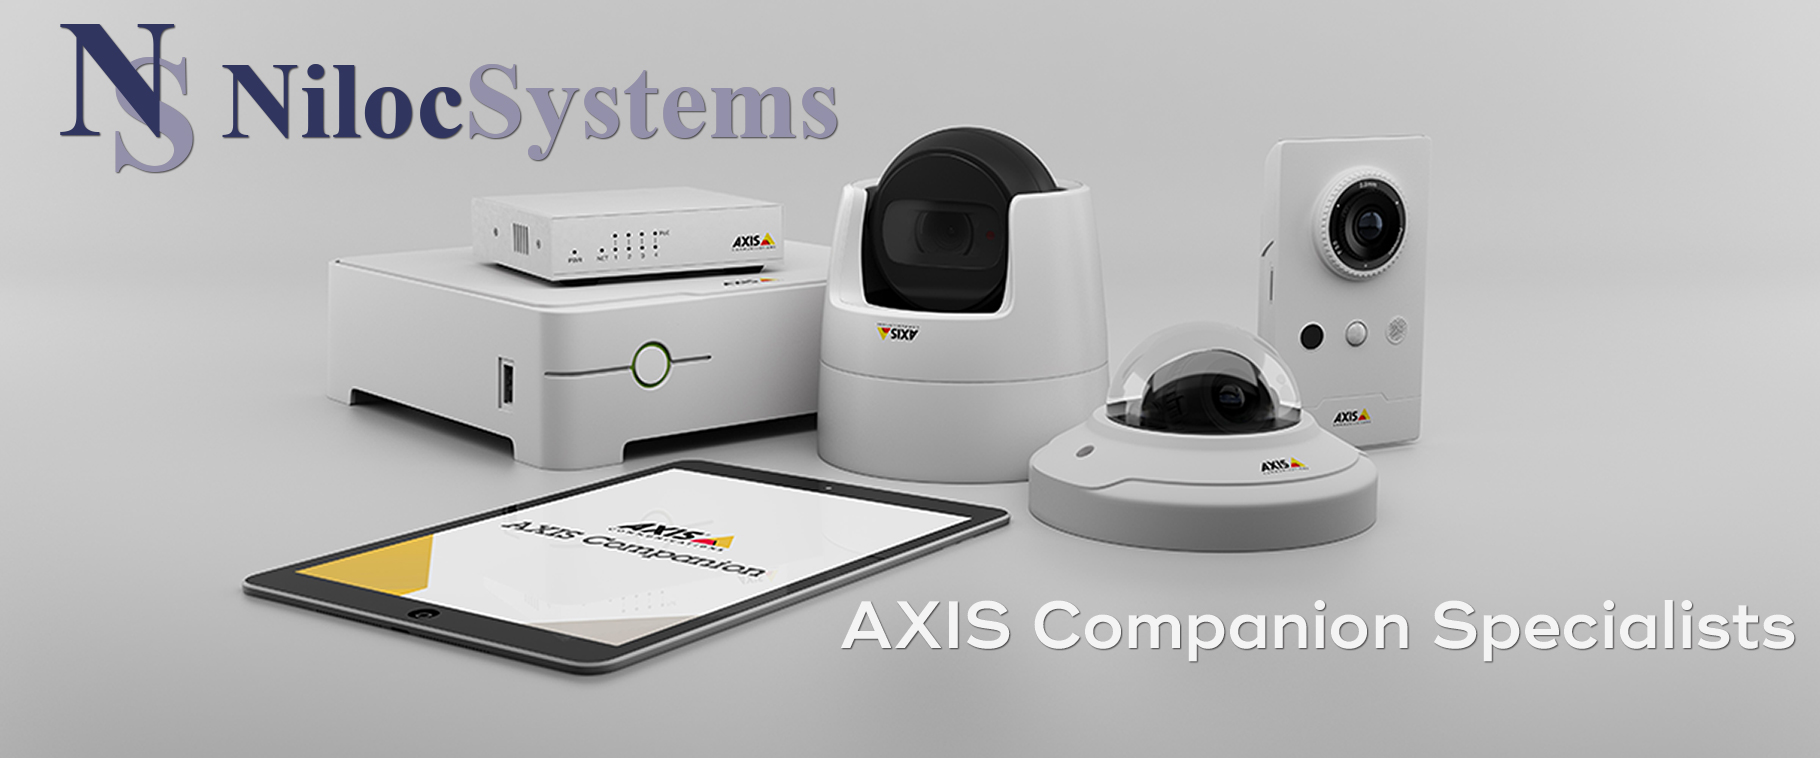 NilocSystems and AXIS Communications Companion Partner Header Image